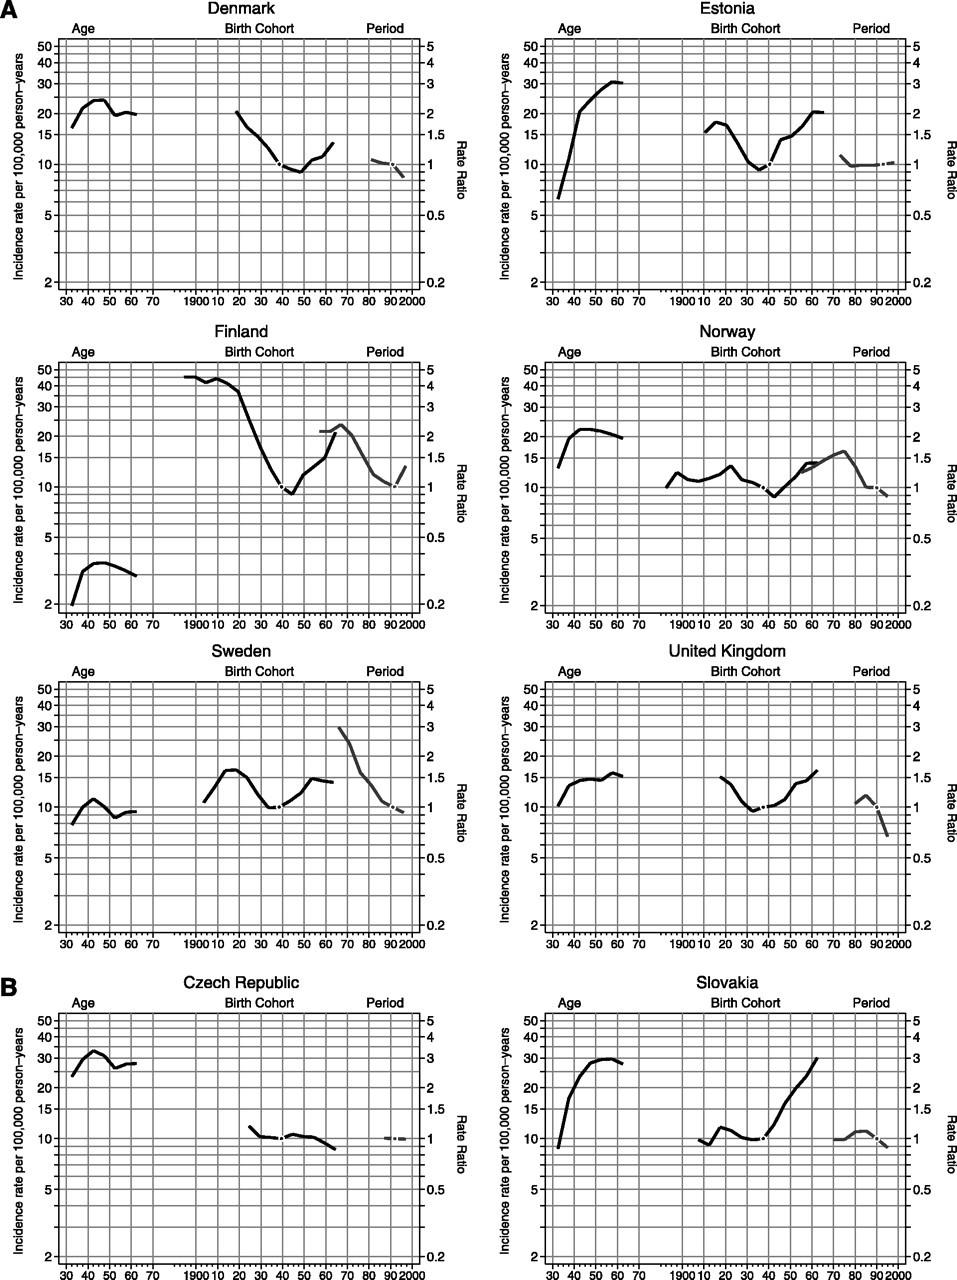 Cervical SCC incidence trends in 13 European countries for women ages 30-64: (A) northern European countries, (B) eastern European countries, (C) southern